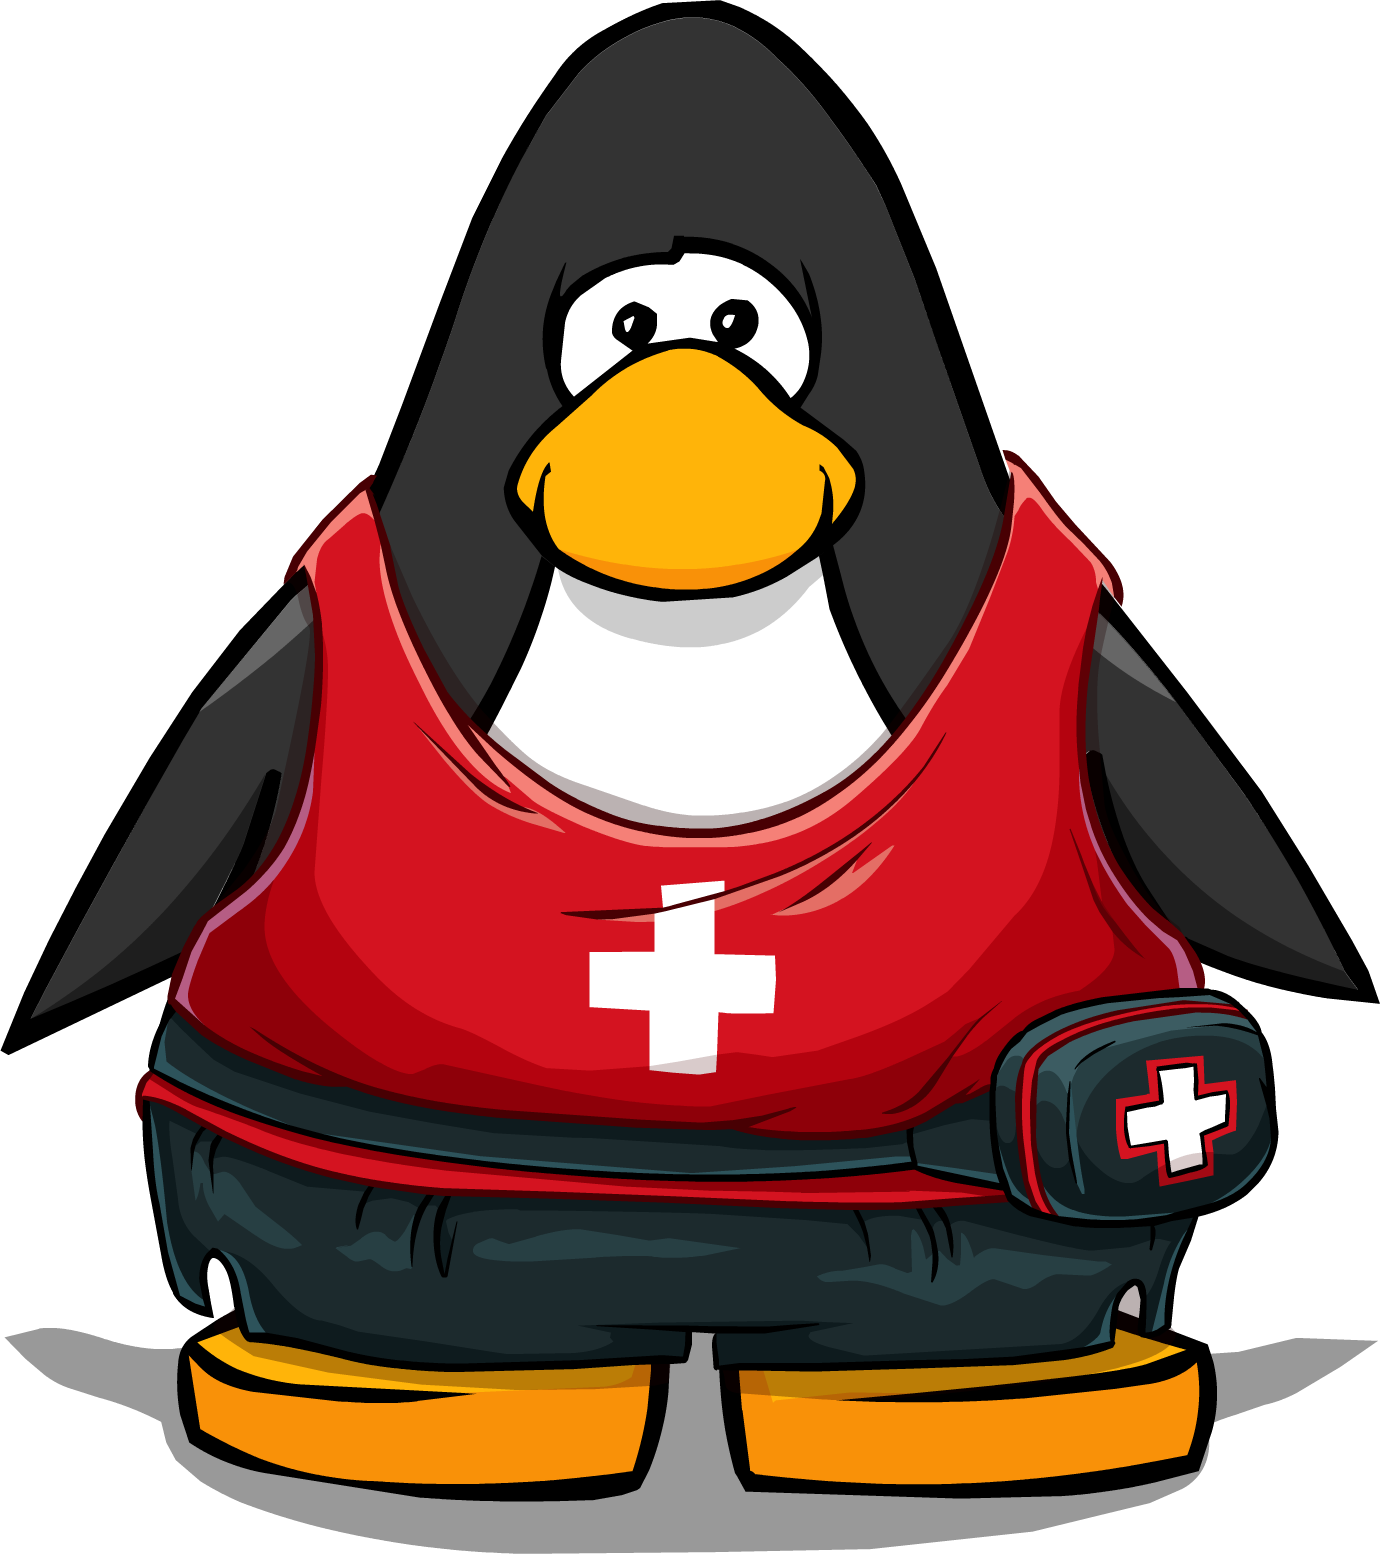 Lifesaver Outfit From A Player Card - Club Penguin Bling Bling Necklace (1380x1554)